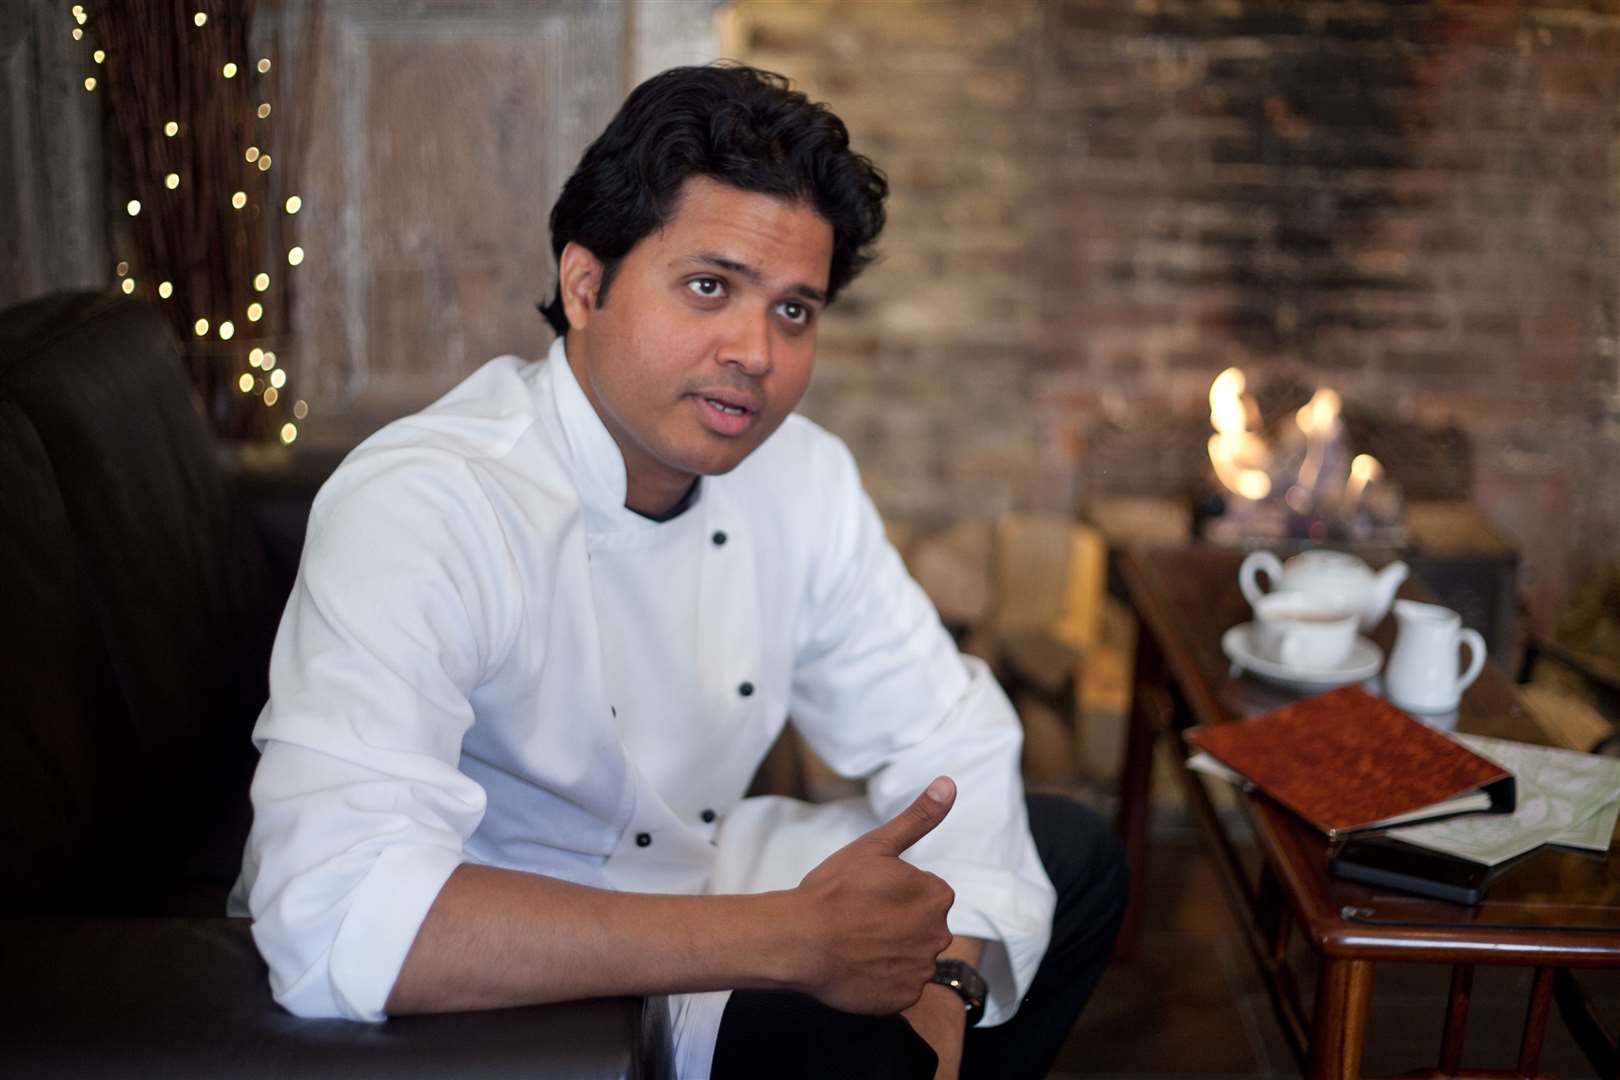 Ambrette owner and head chef Dev Biswal. Picture: Manu Palomeque